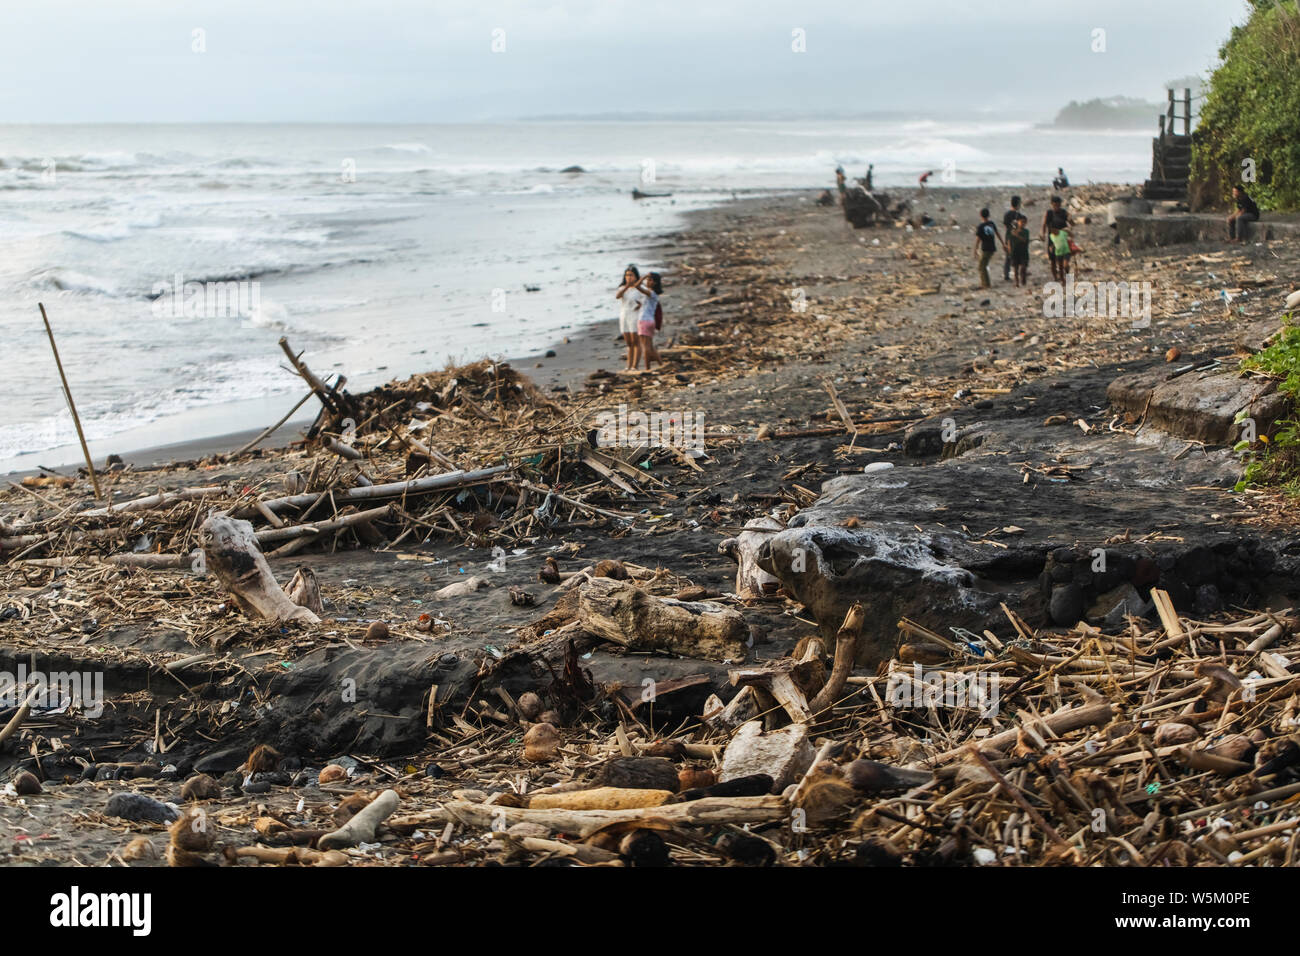 BALI, INDONESIA - APRIL 31, 2019: Beach pollution in Bali. Hard life of local people around garbage on the beach. Recycling waste problem Stock Photo